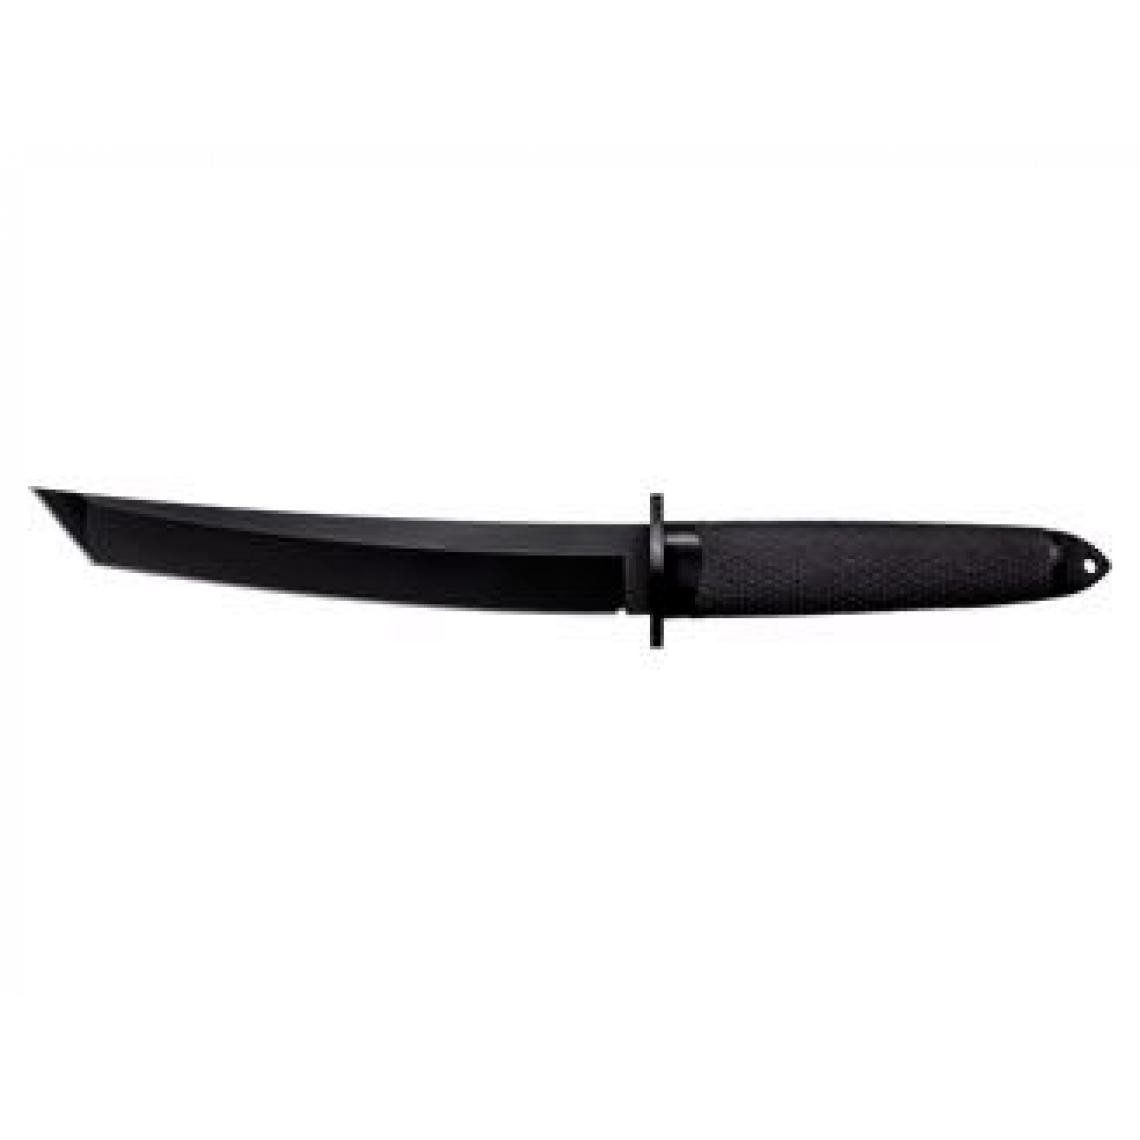 Divers Marques - Cold Steel MAGNUM TANTO II 3V 7,5" 13QMBII - Outils de coupe